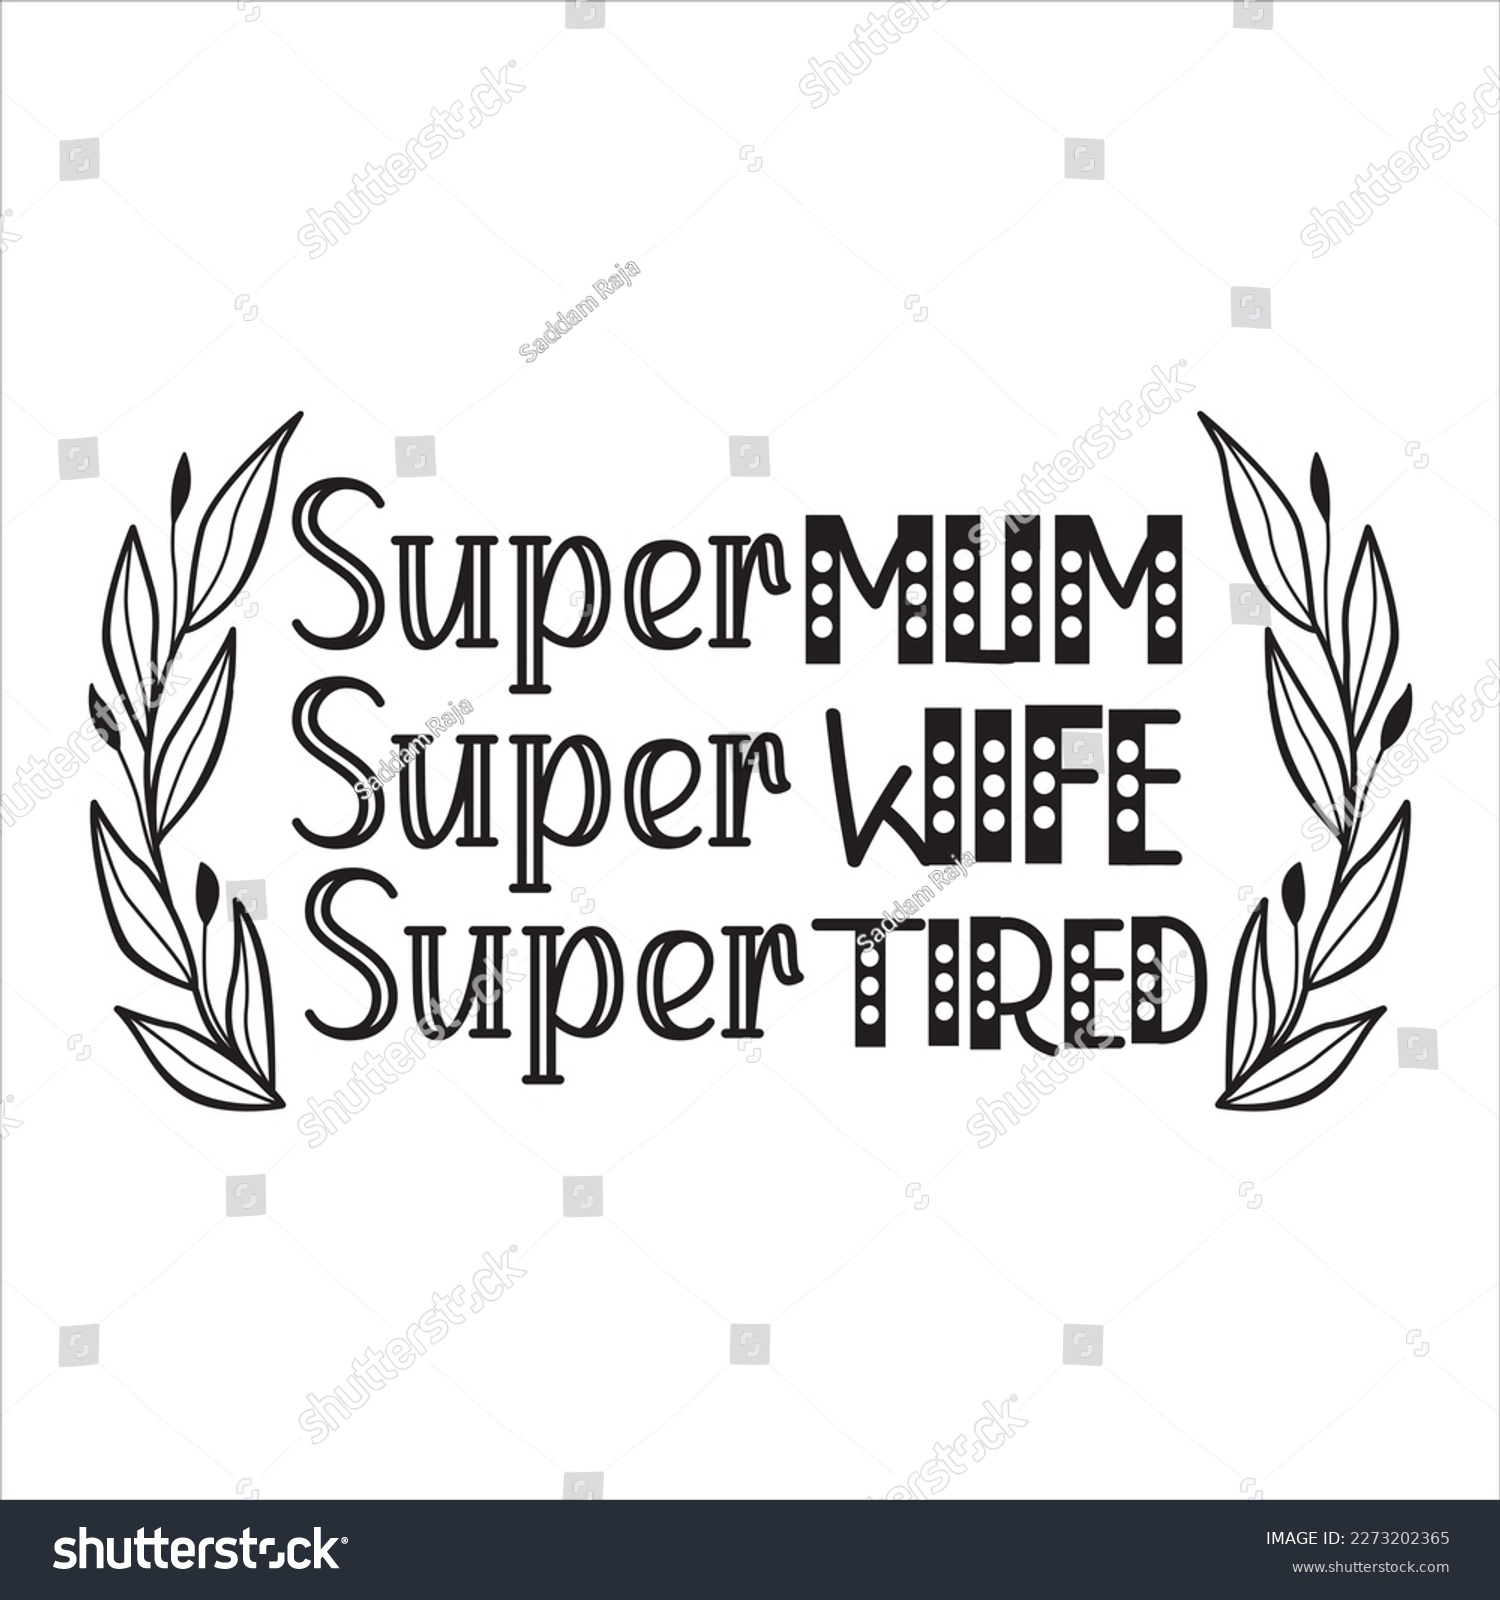 SVG of Super Mum Super Wife Super Mom Super Tired - Mother’s Day T shirt Design, svg files for Cutting, bag, cups, card, prints and posters svg